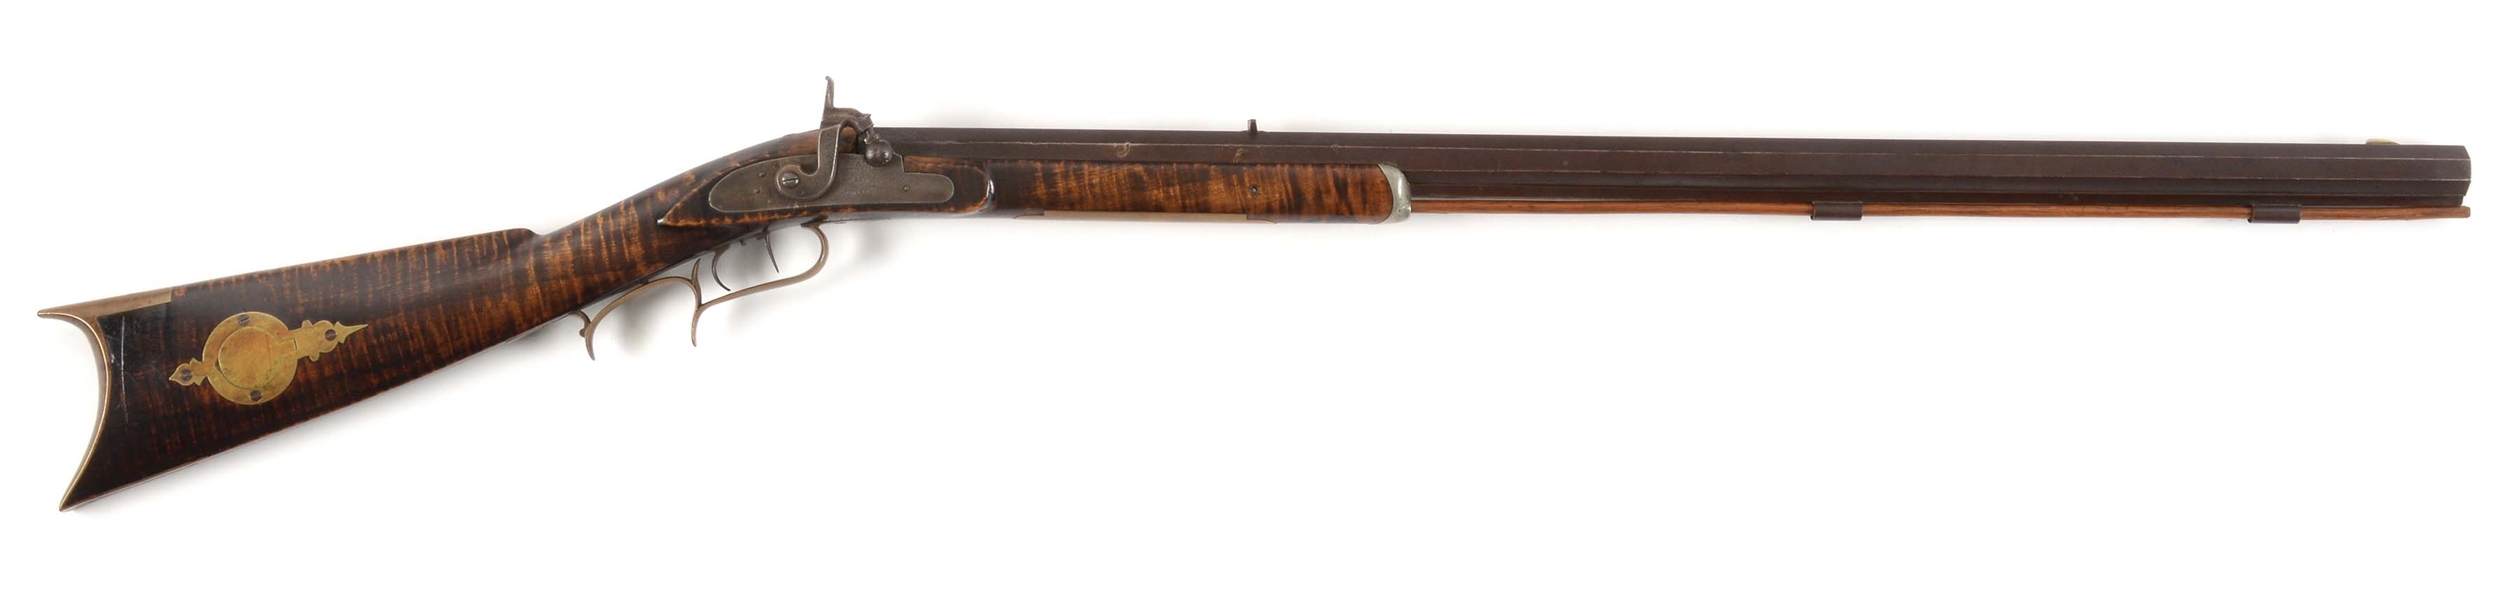 (A) KENTUCKY STYLE PERCUSSION RIFLE SIGNED P. P. KING.